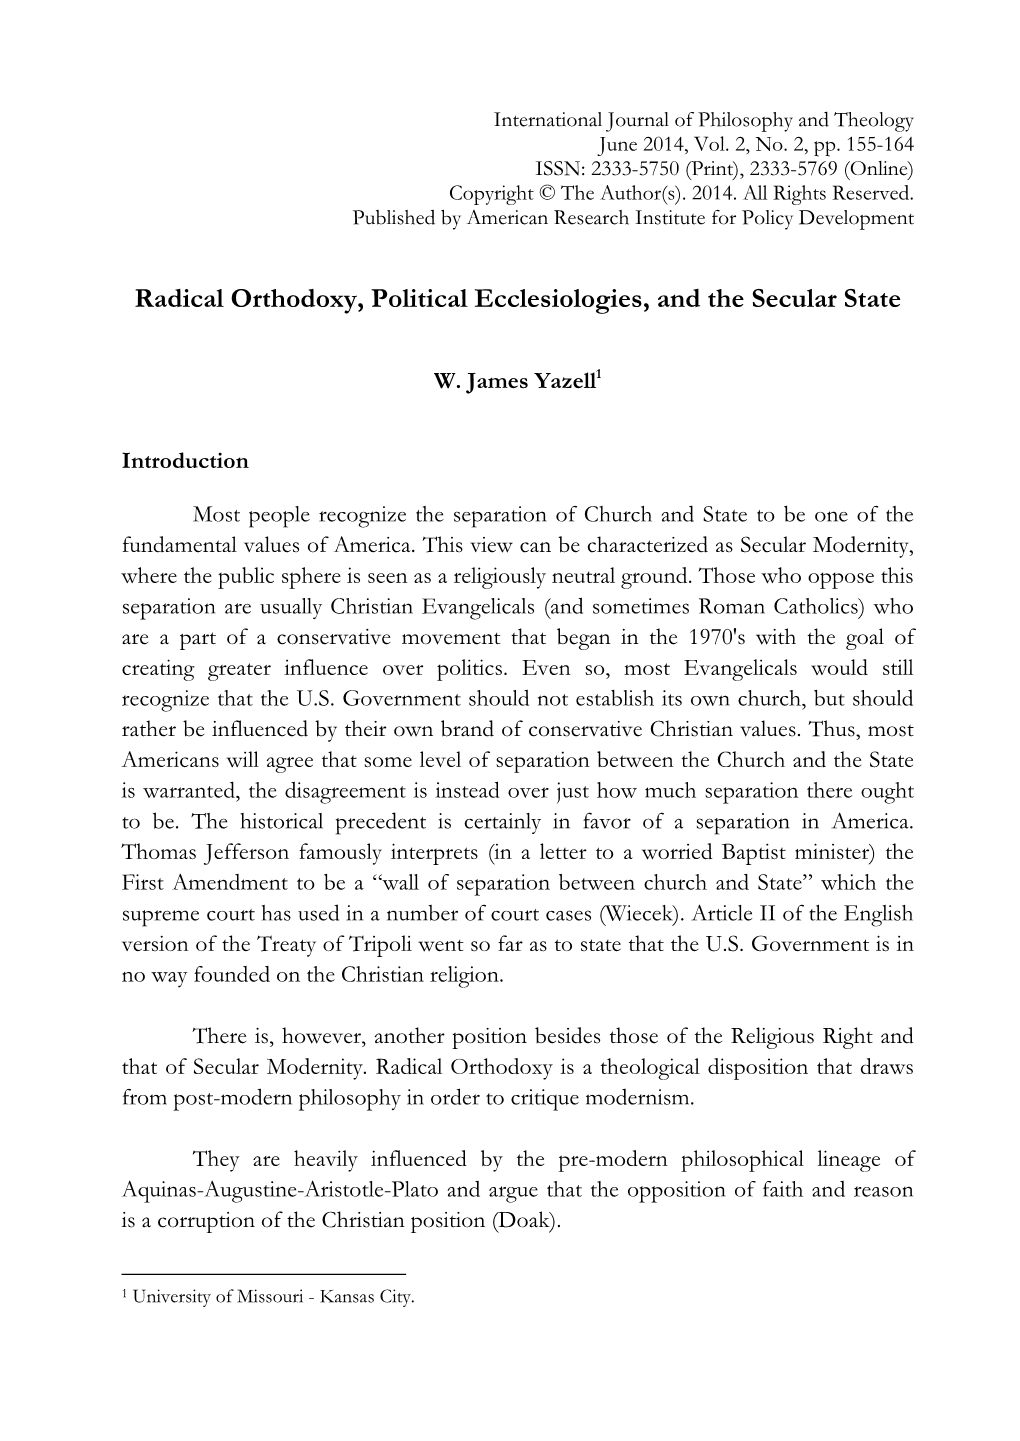 Radical Orthodoxy, Political Ecclesiologies, and the Secular State